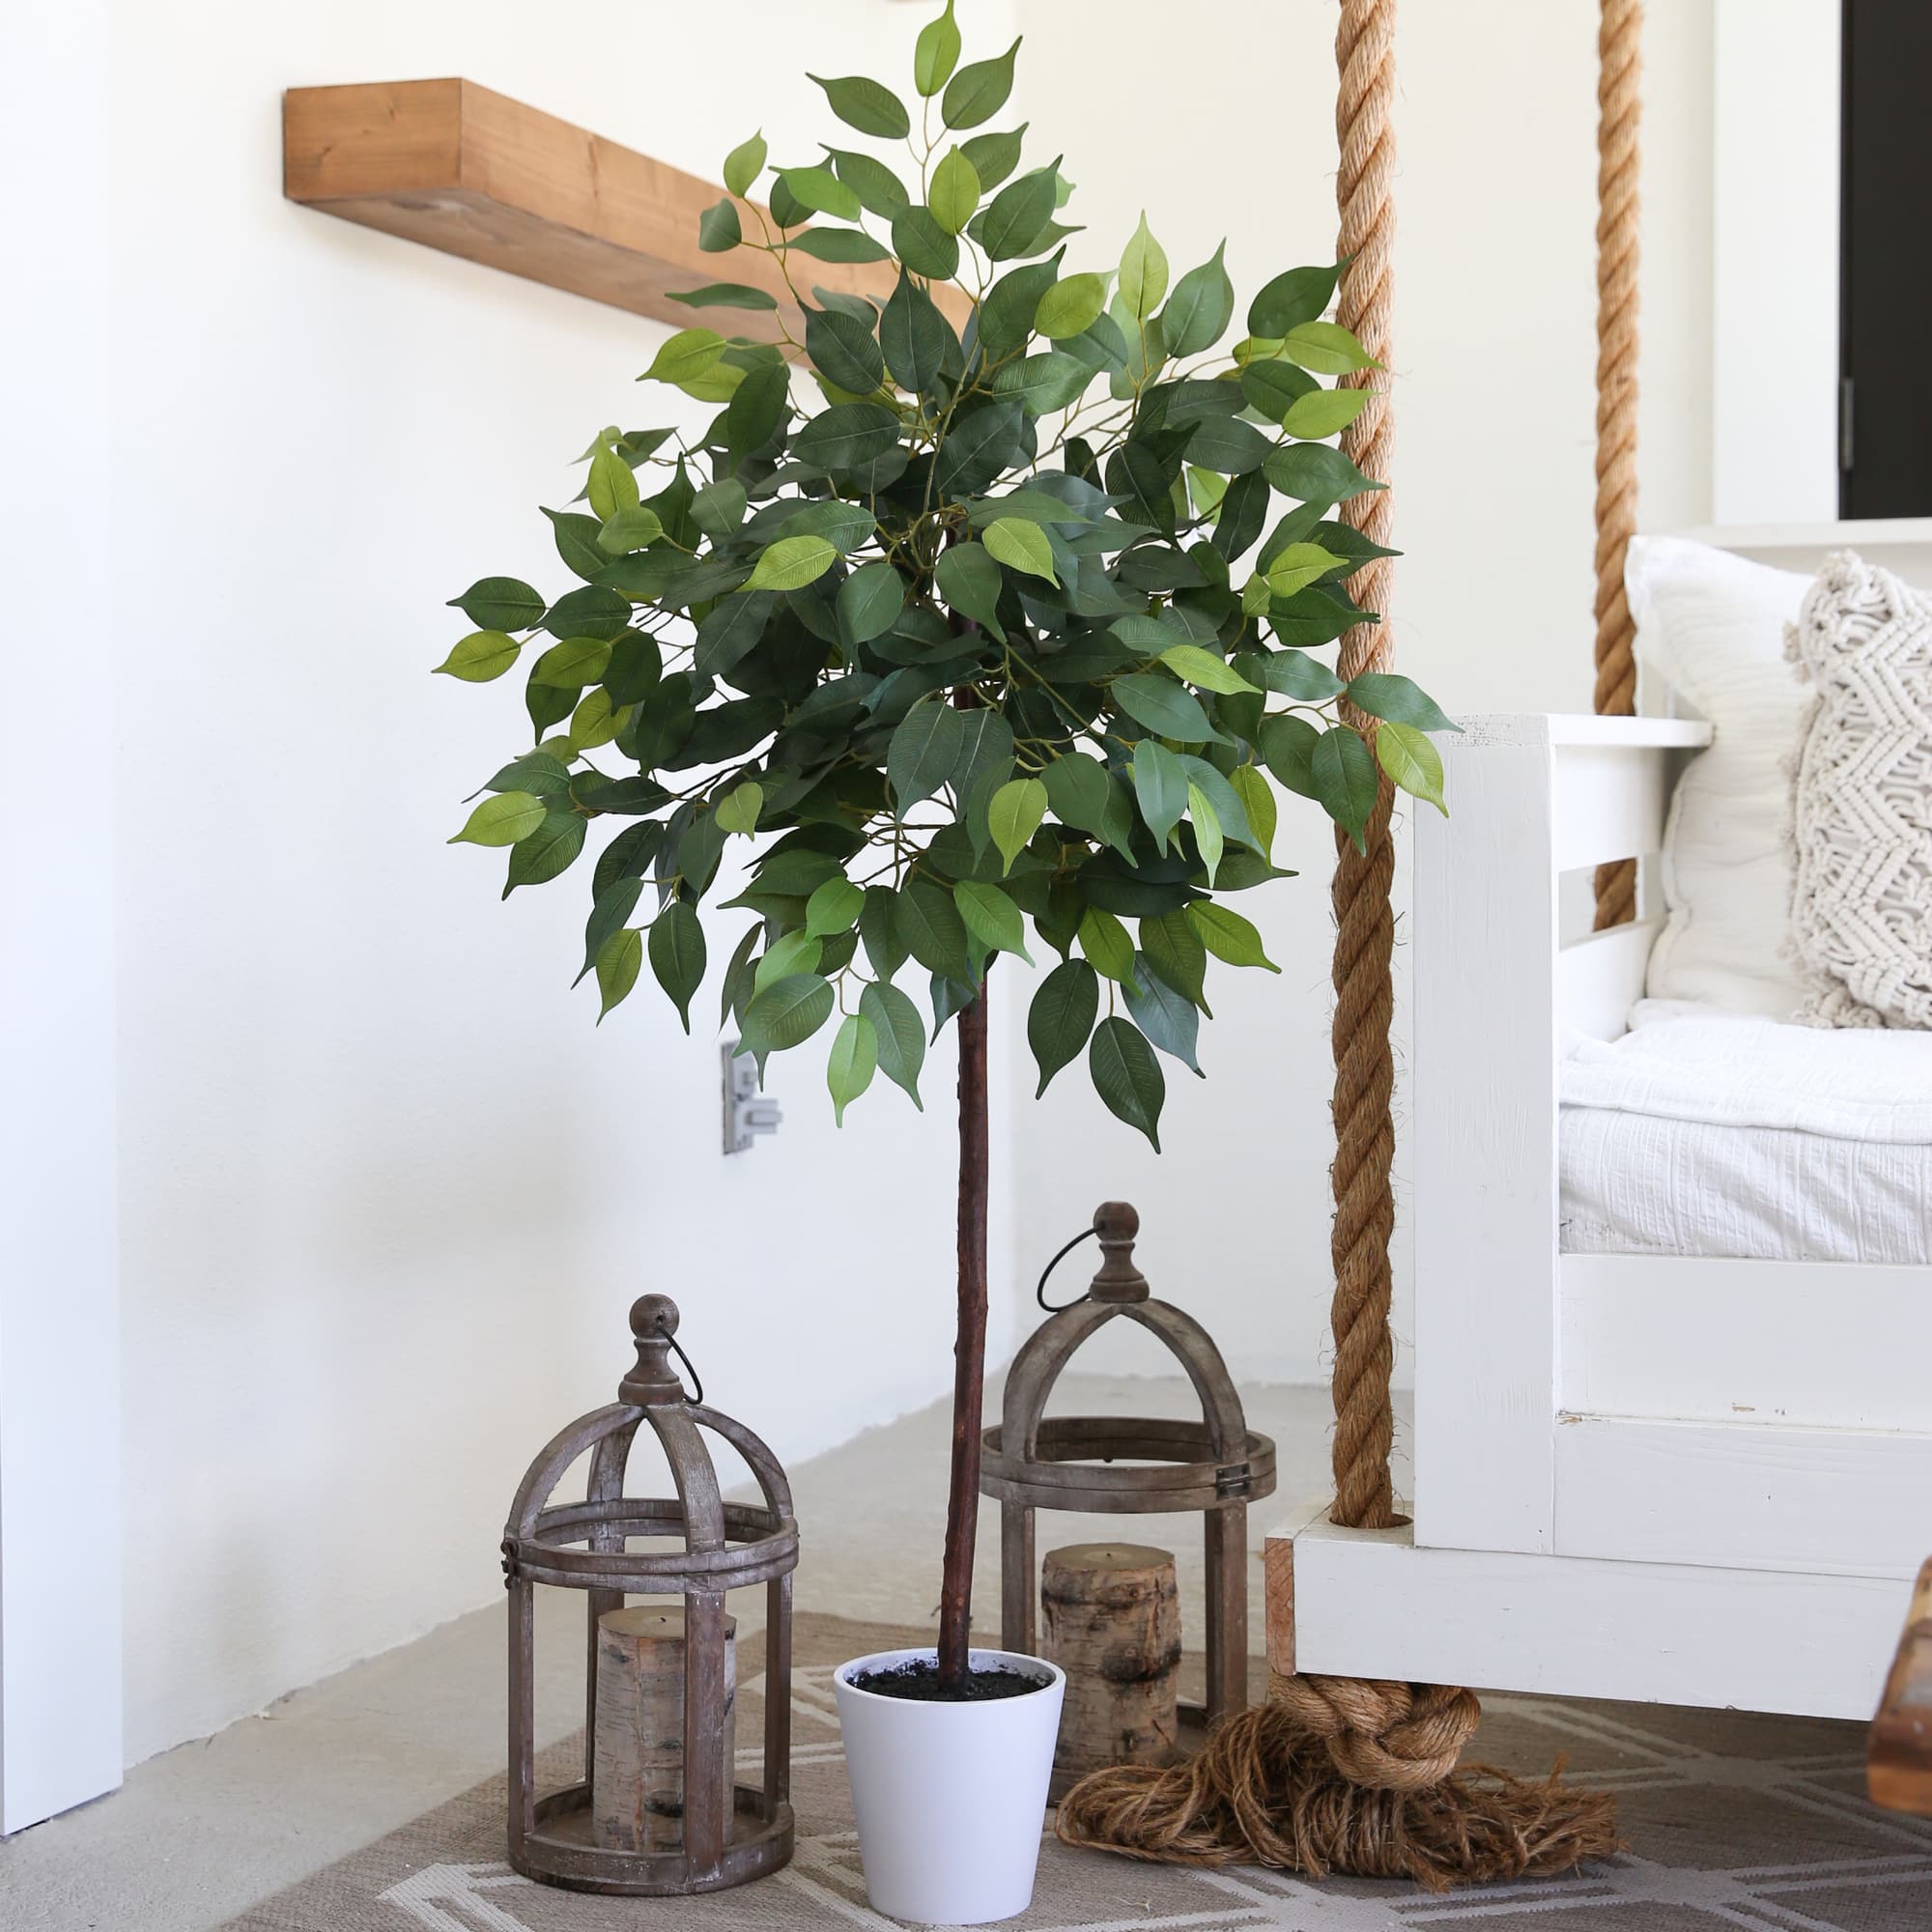 4ft. Artificial Ficus Tree with Decorative Planter